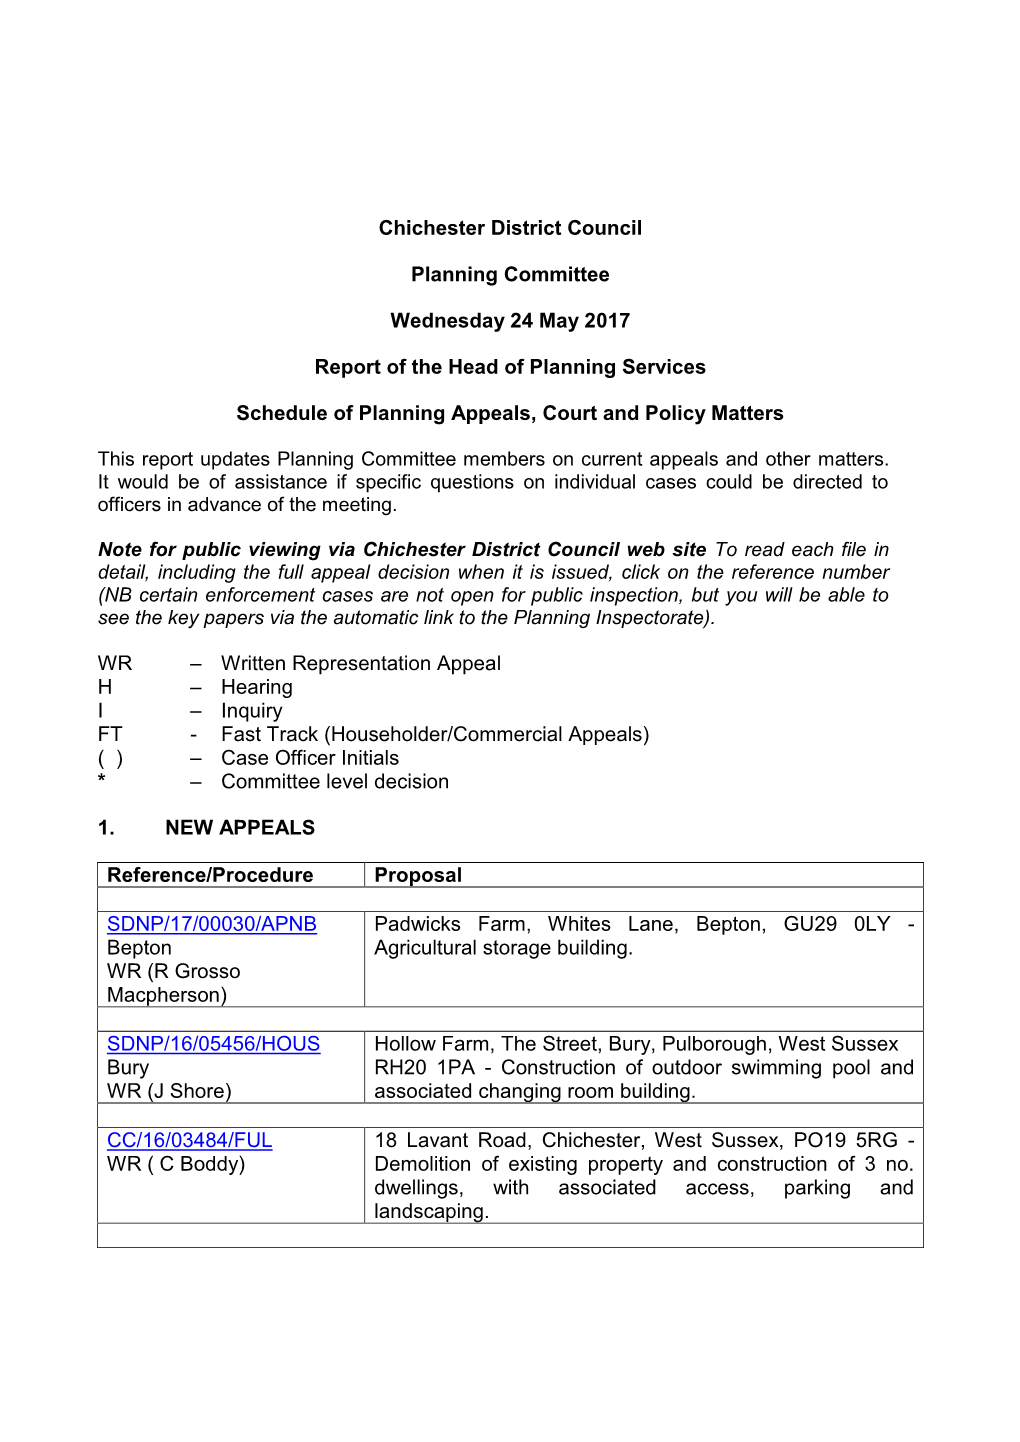 Chichester District Council Planning Committee Wednesday 24 May